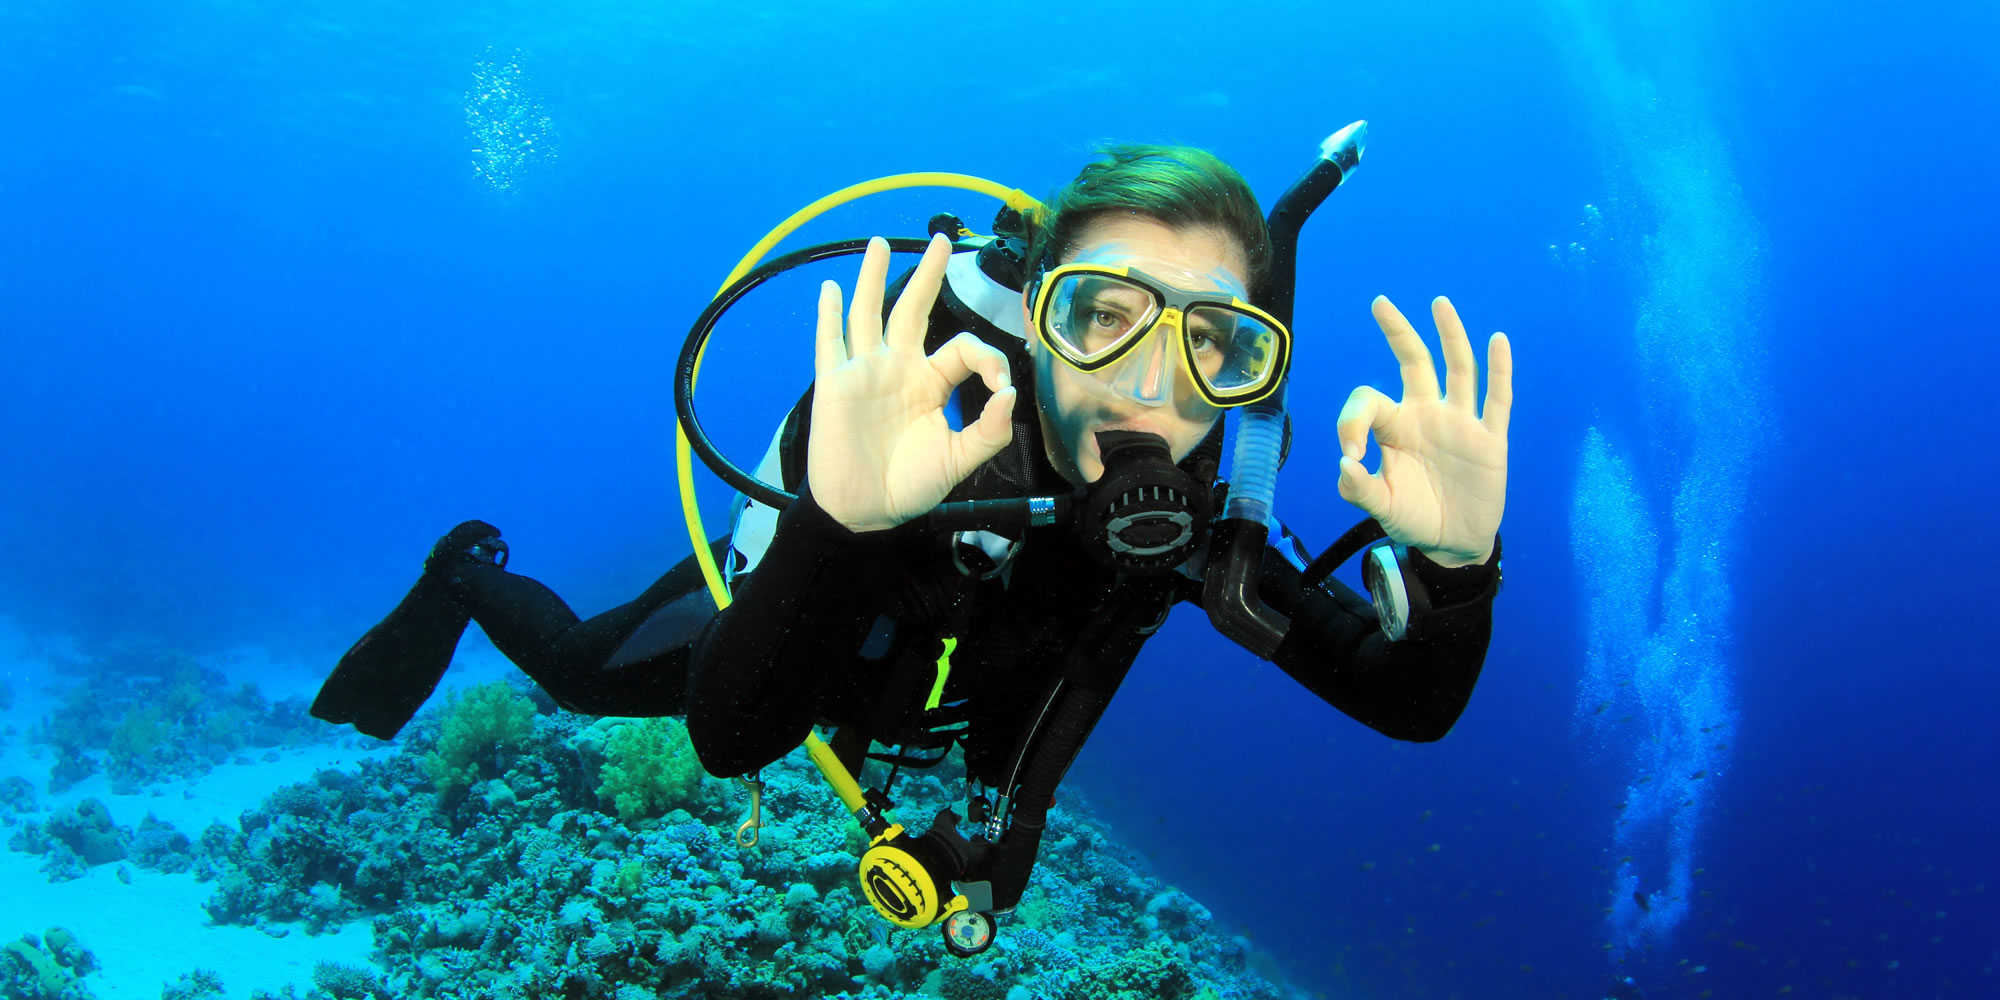 trip to dive|diving travel planner app